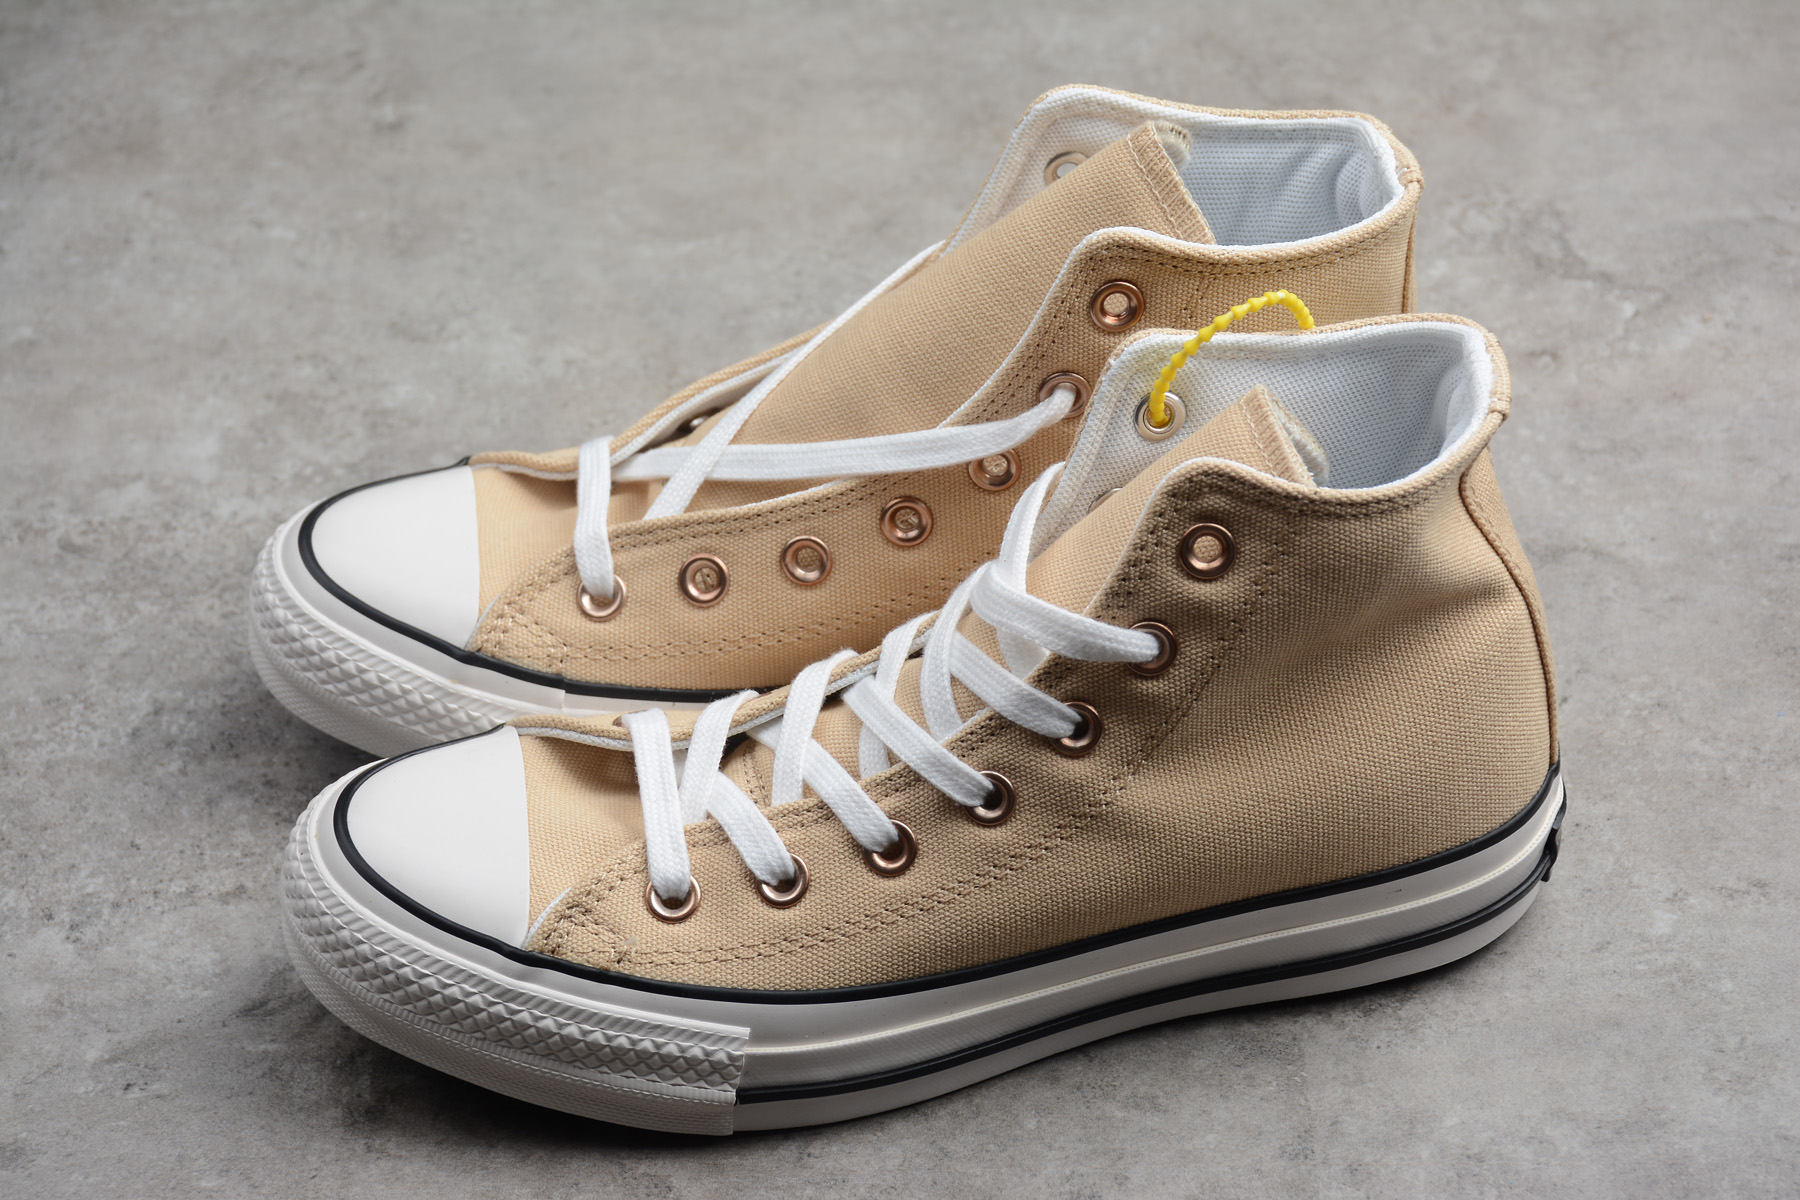 converse all star 100 ox - 63% remise 